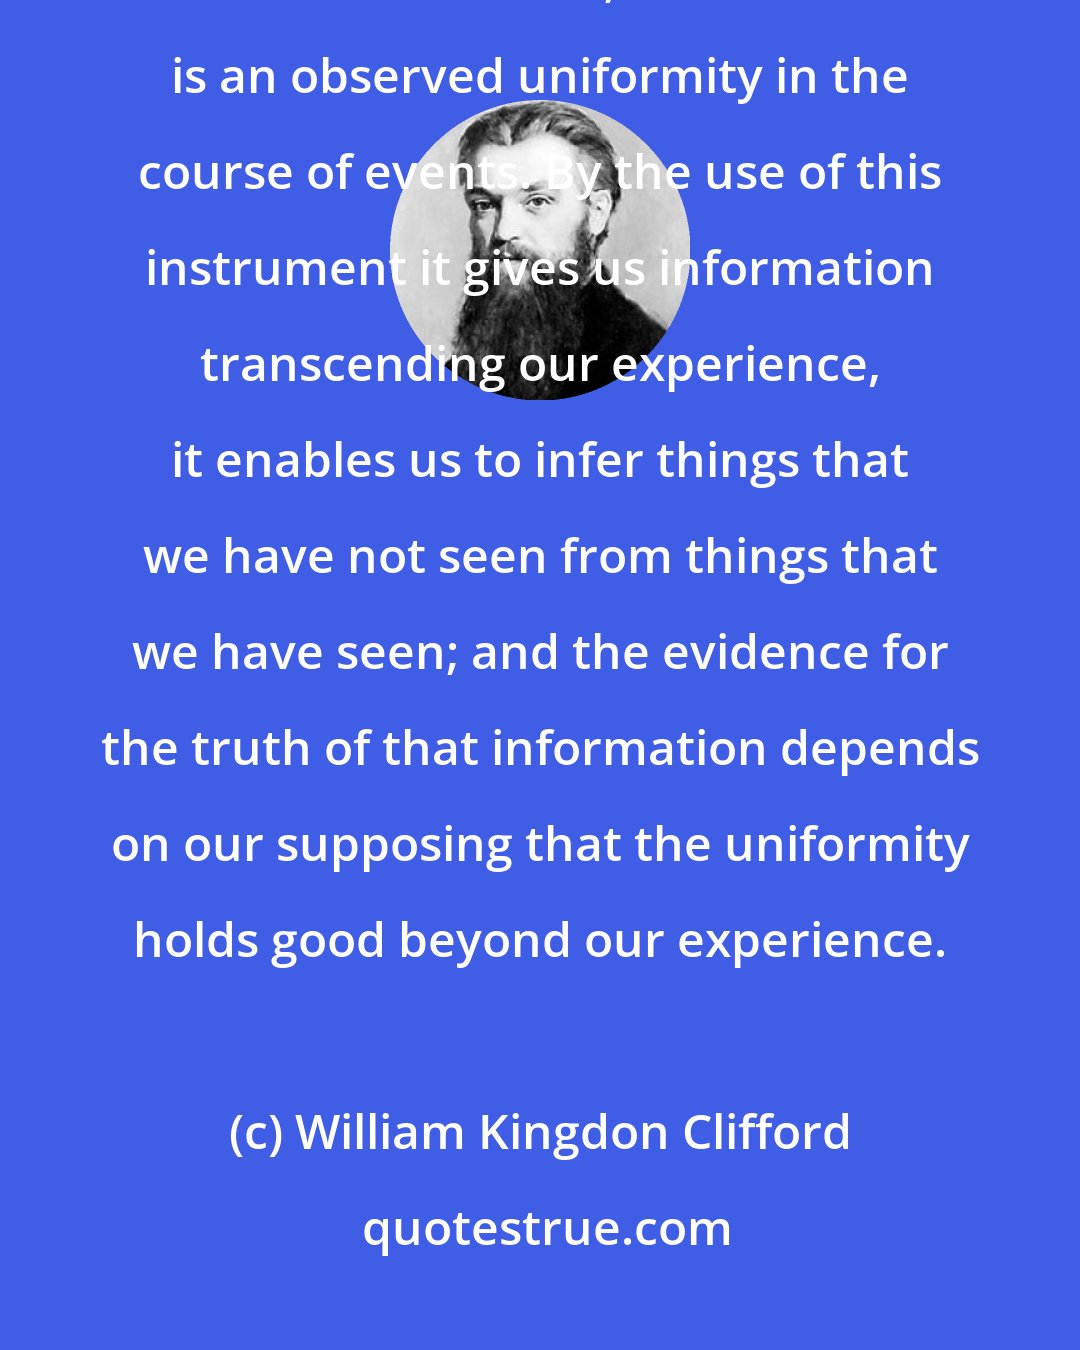 William Kingdon Clifford: The aim of scientific thought, then, is to apply past experience to new circumstances; the instrument is an observed uniformity in the course of events. By the use of this instrument it gives us information transcending our experience, it enables us to infer things that we have not seen from things that we have seen; and the evidence for the truth of that information depends on our supposing that the uniformity holds good beyond our experience.